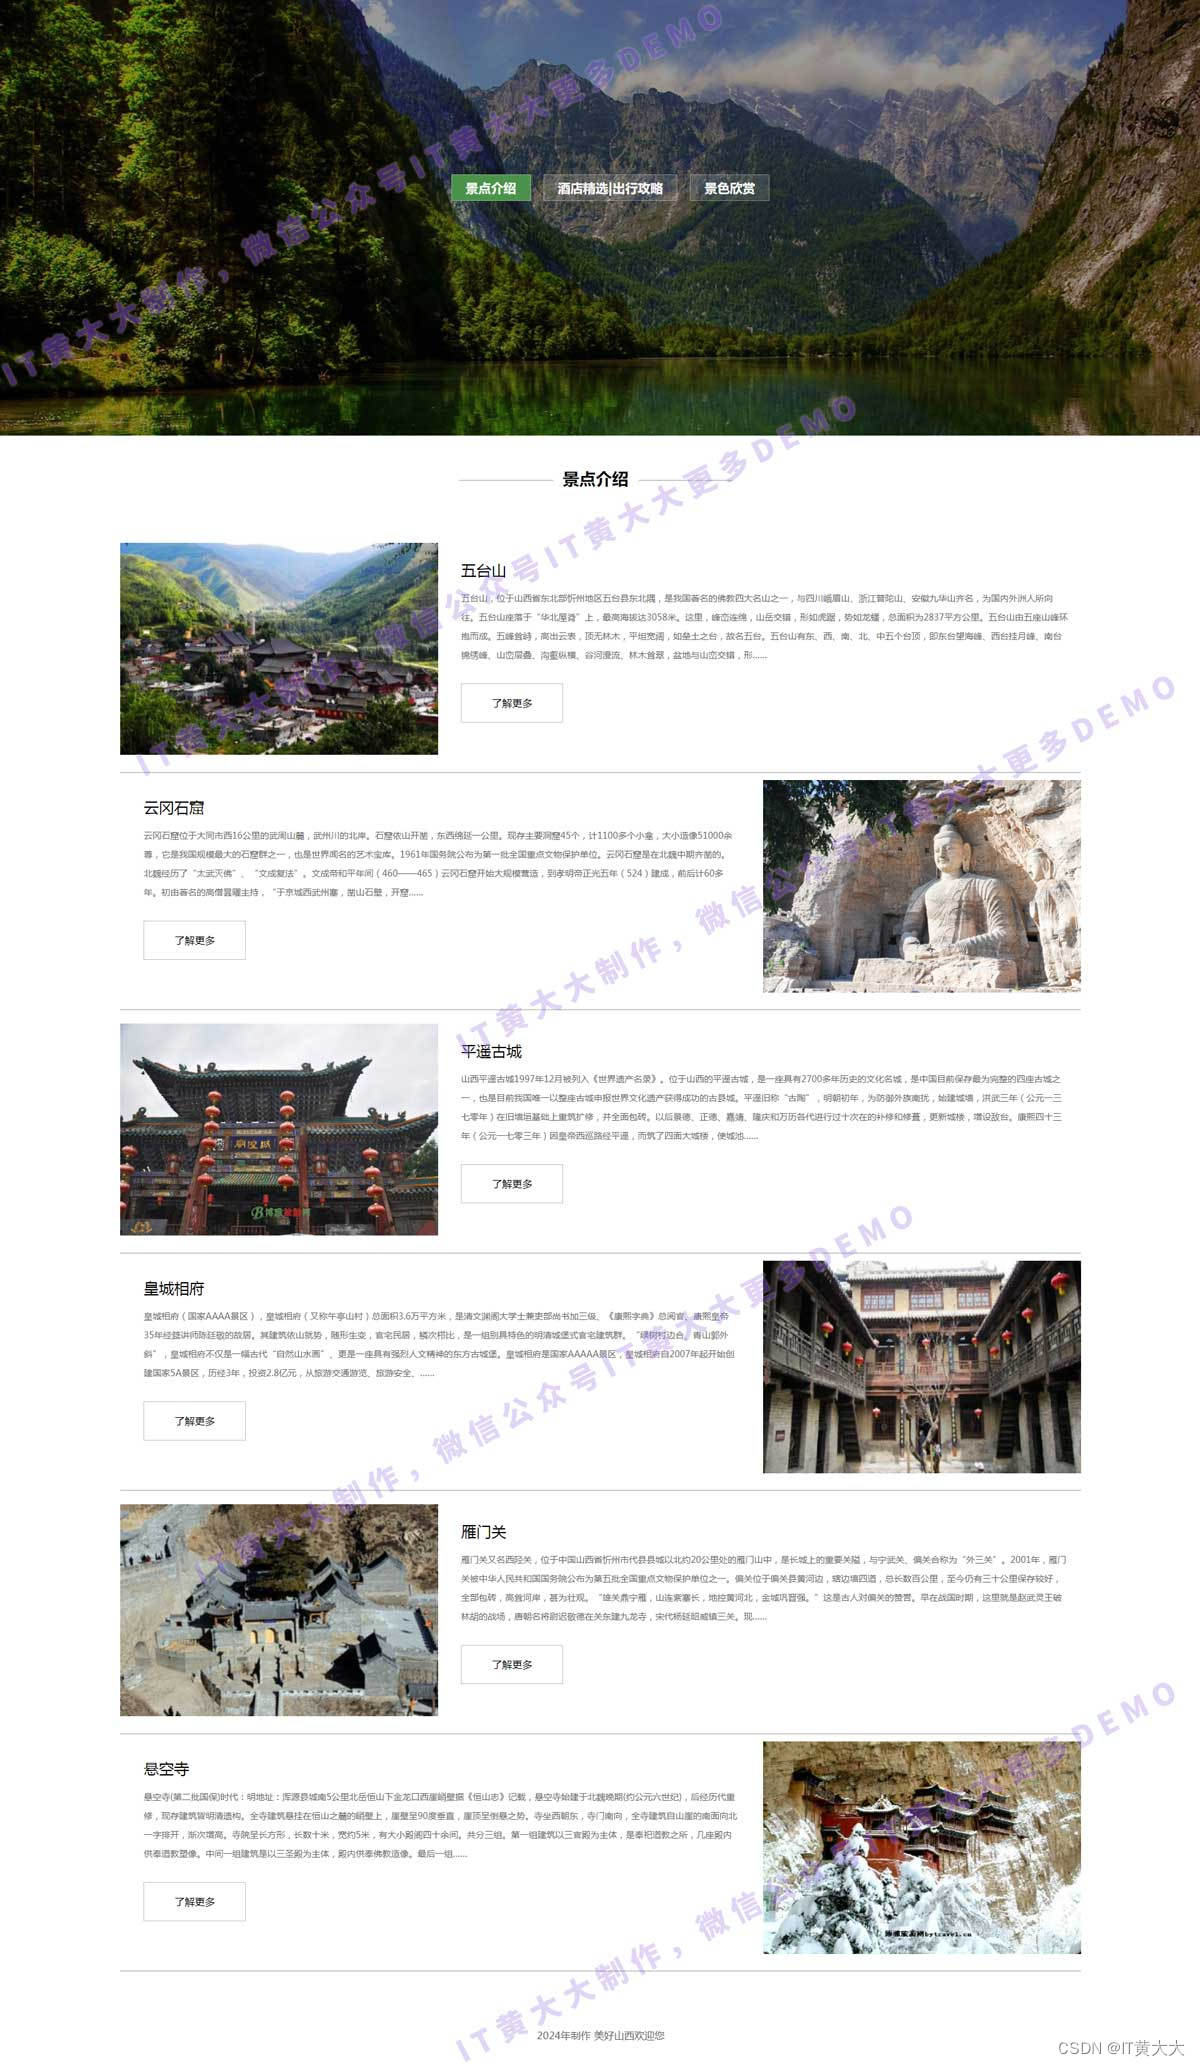 【web网页制作】<span style='color:red;'>html</span>+css旅游家乡山西主题网页制作（3<span style='color:red;'>页面</span>）【附<span style='color:red;'>源</span><span style='color:red;'>码</span>】